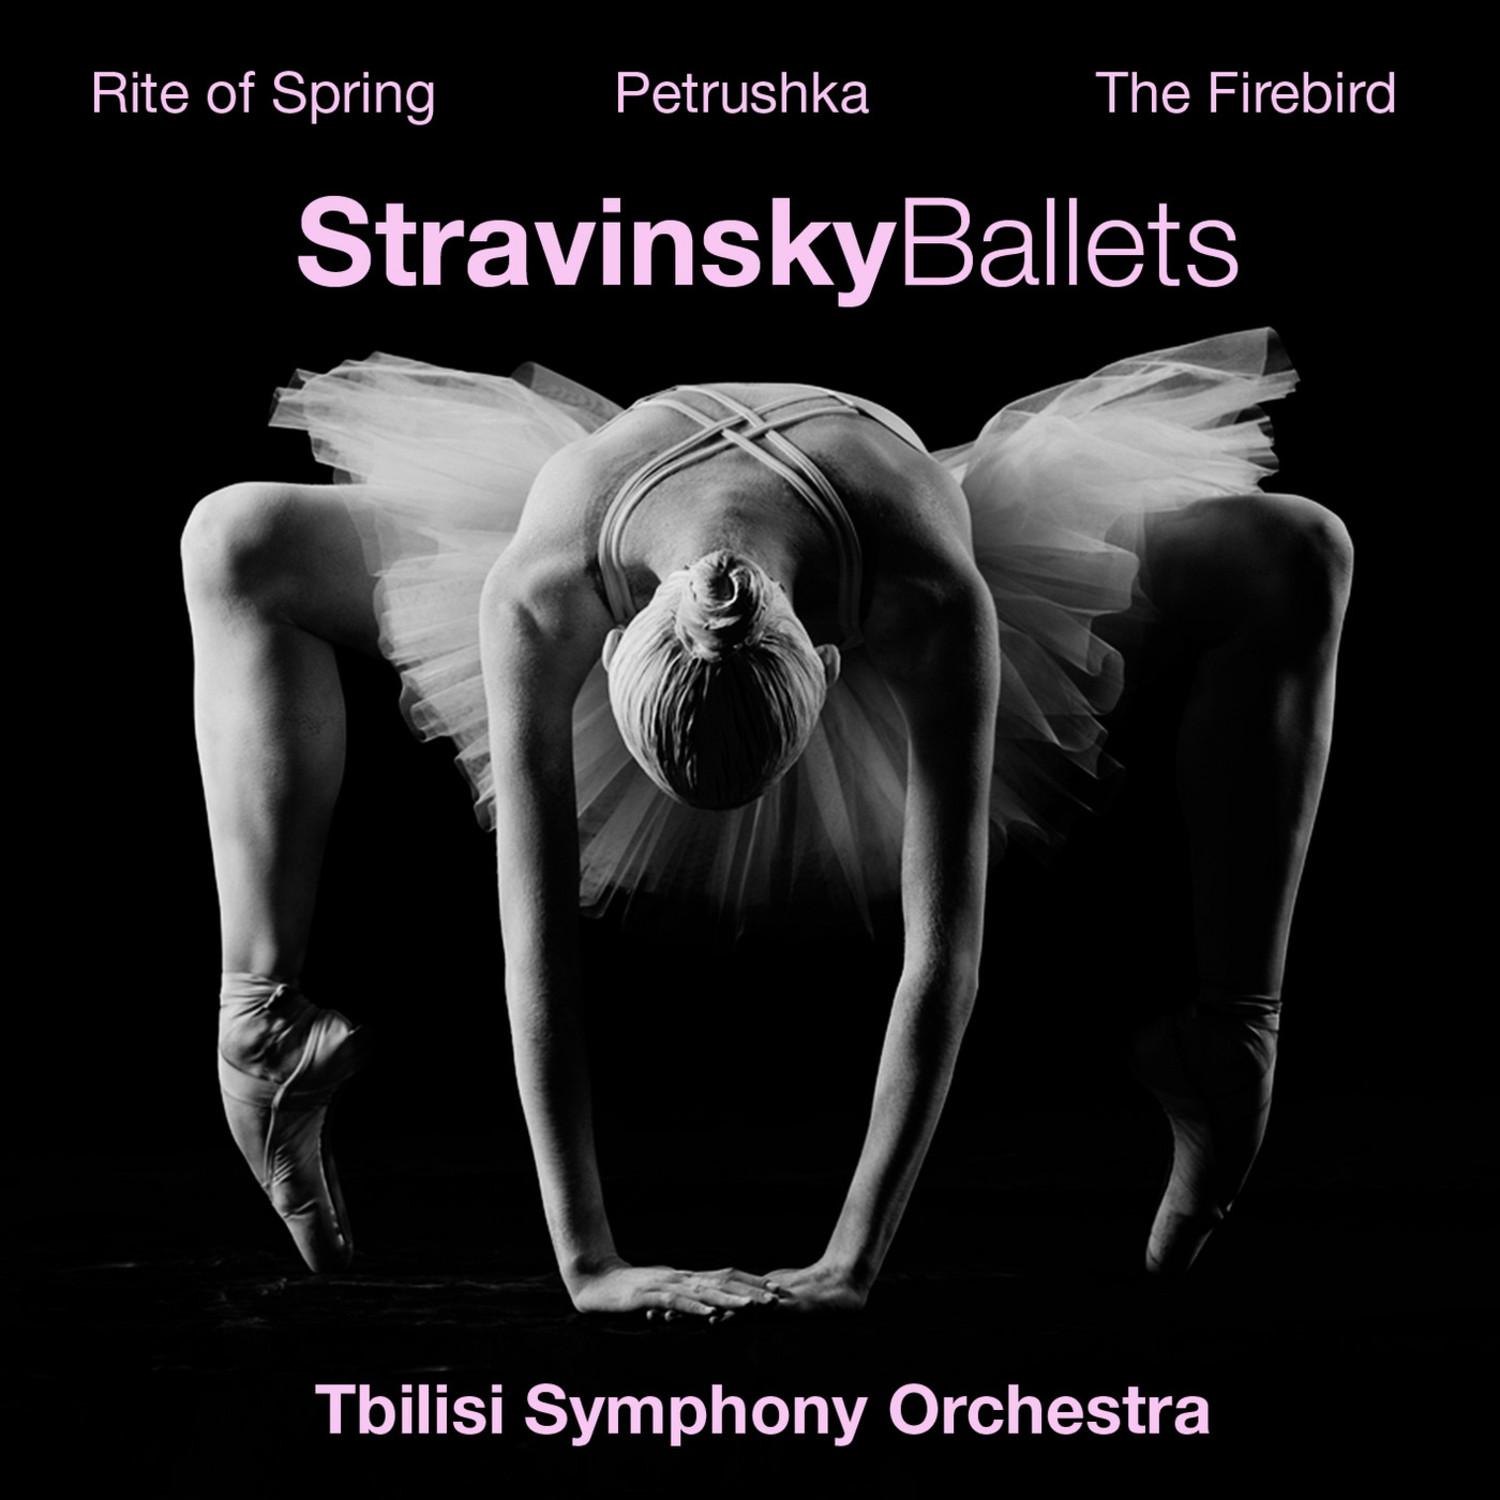 Petrushka Ballet Suite - Burlesque in Four Scenes: Part IV. The Shrovetide Fair in the Evening: III. The Peasant and the Bear